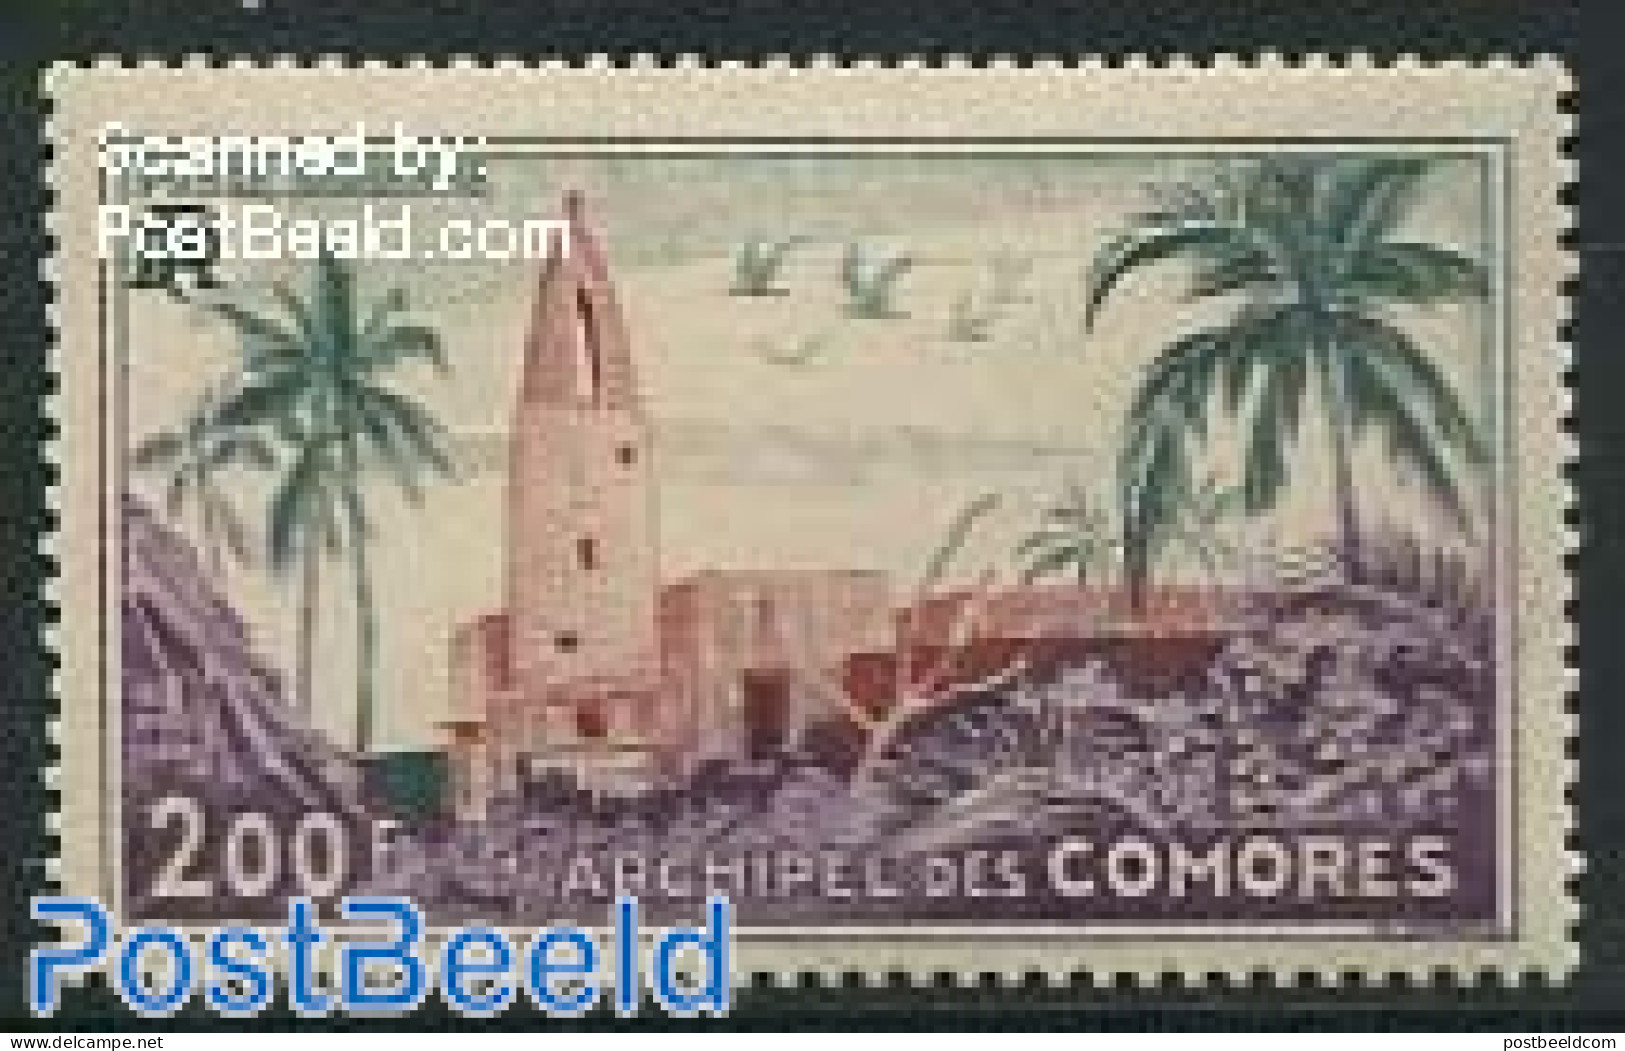 Comoros 1950 200Fr, Stamp Out Of Set, Unused (hinged), Nature - Birds - Comoros